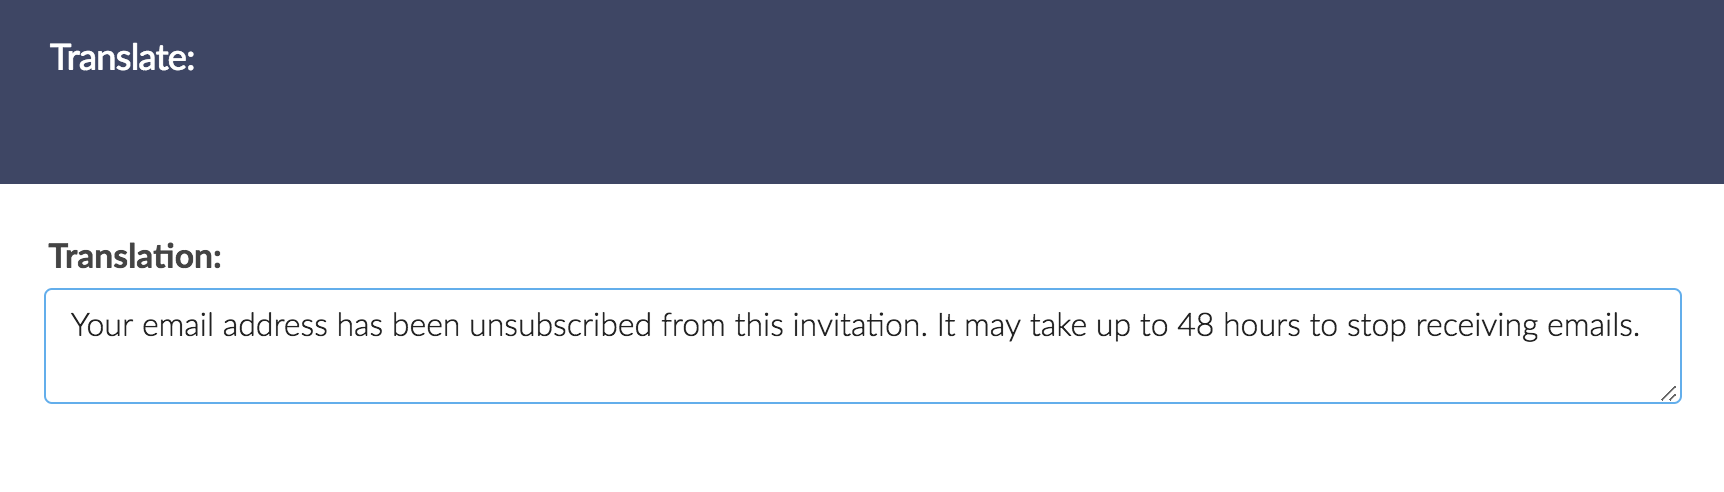 Translate Unsubscribe Confirmation Message